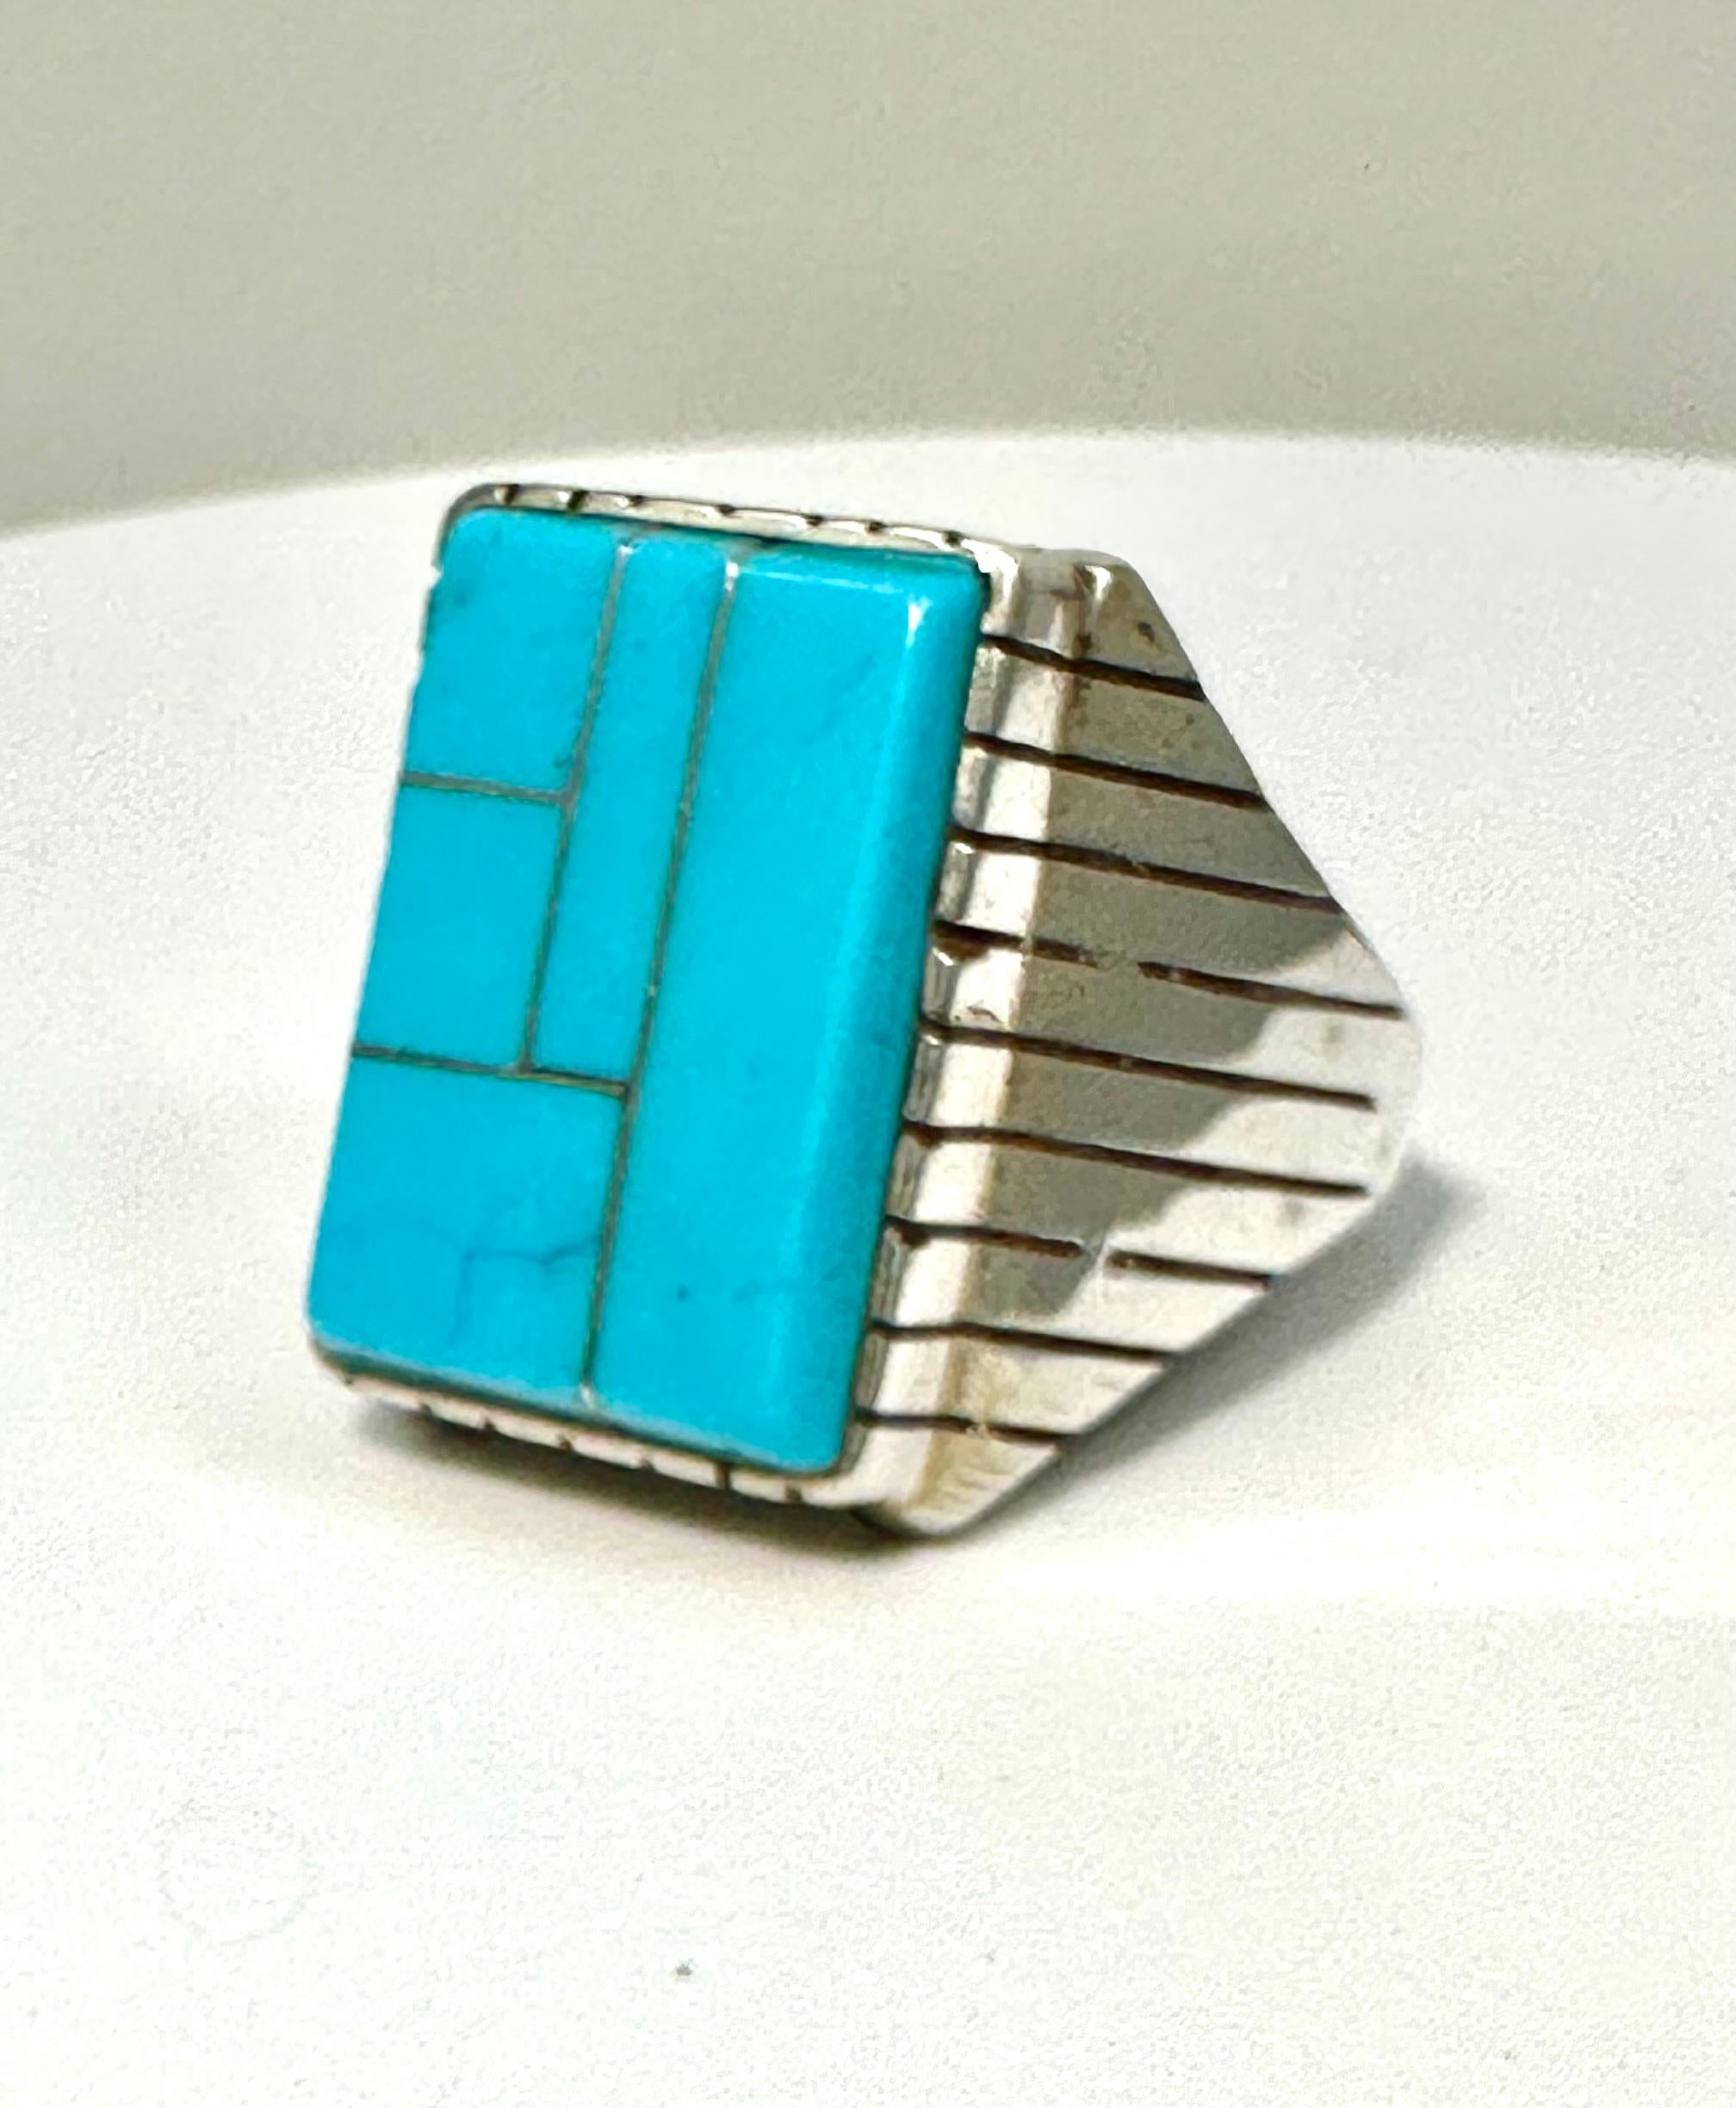 Navajo Sterling Silver .925 Kingman Turquoise 15 x 20mm Rectangle Ring Size 10.5

Turquoise, a blend of the color blue and the color green, has some of the same cool and calming attributes. The color turquoise is associated with meanings of